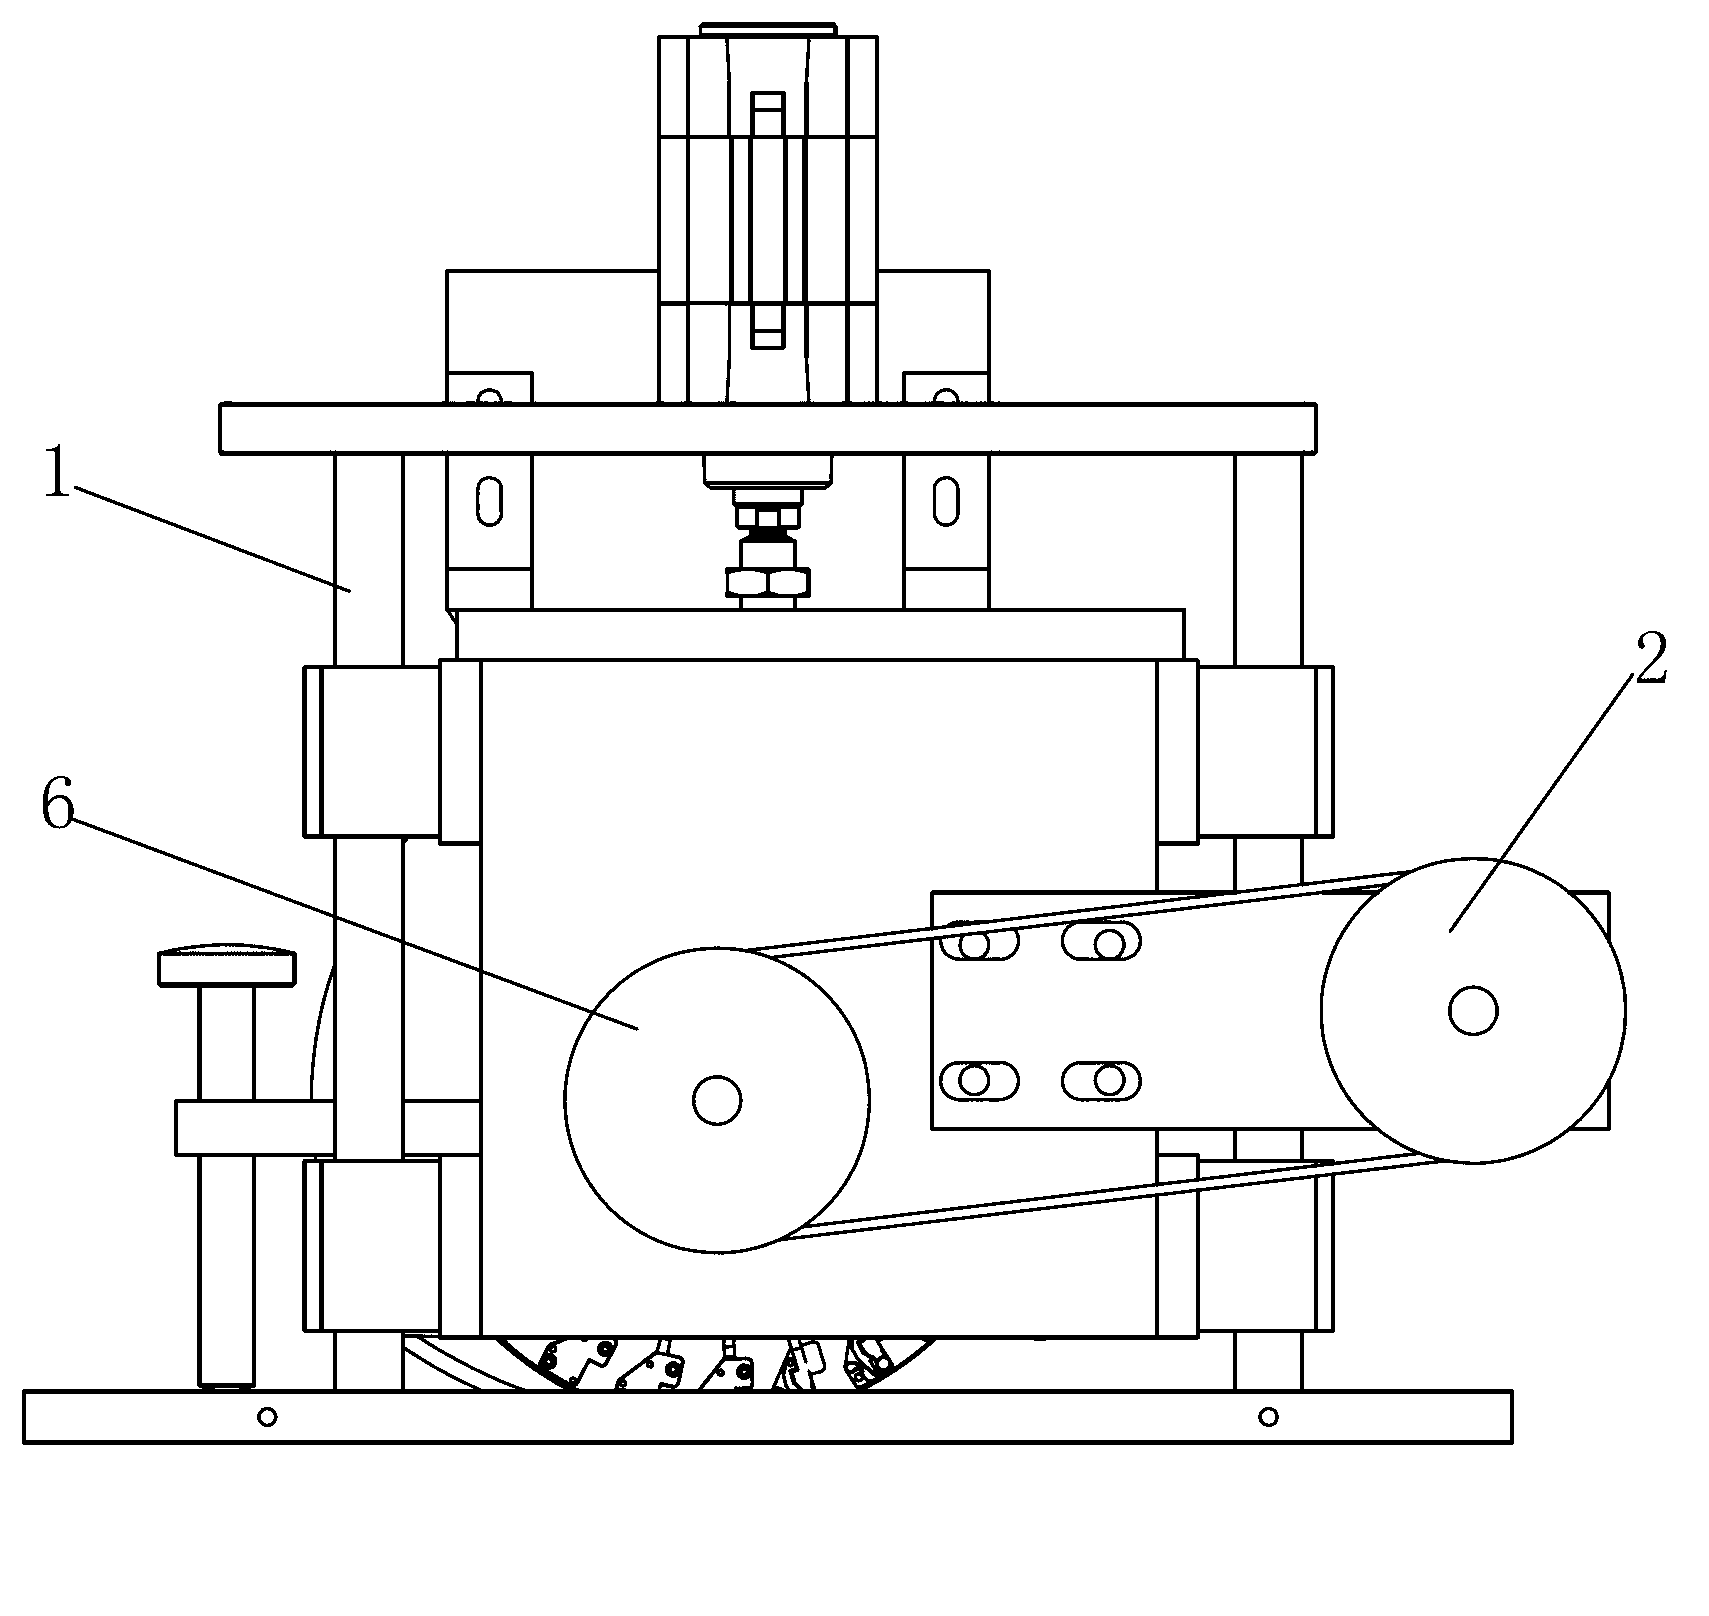 Equipment for producing capsule filter rods